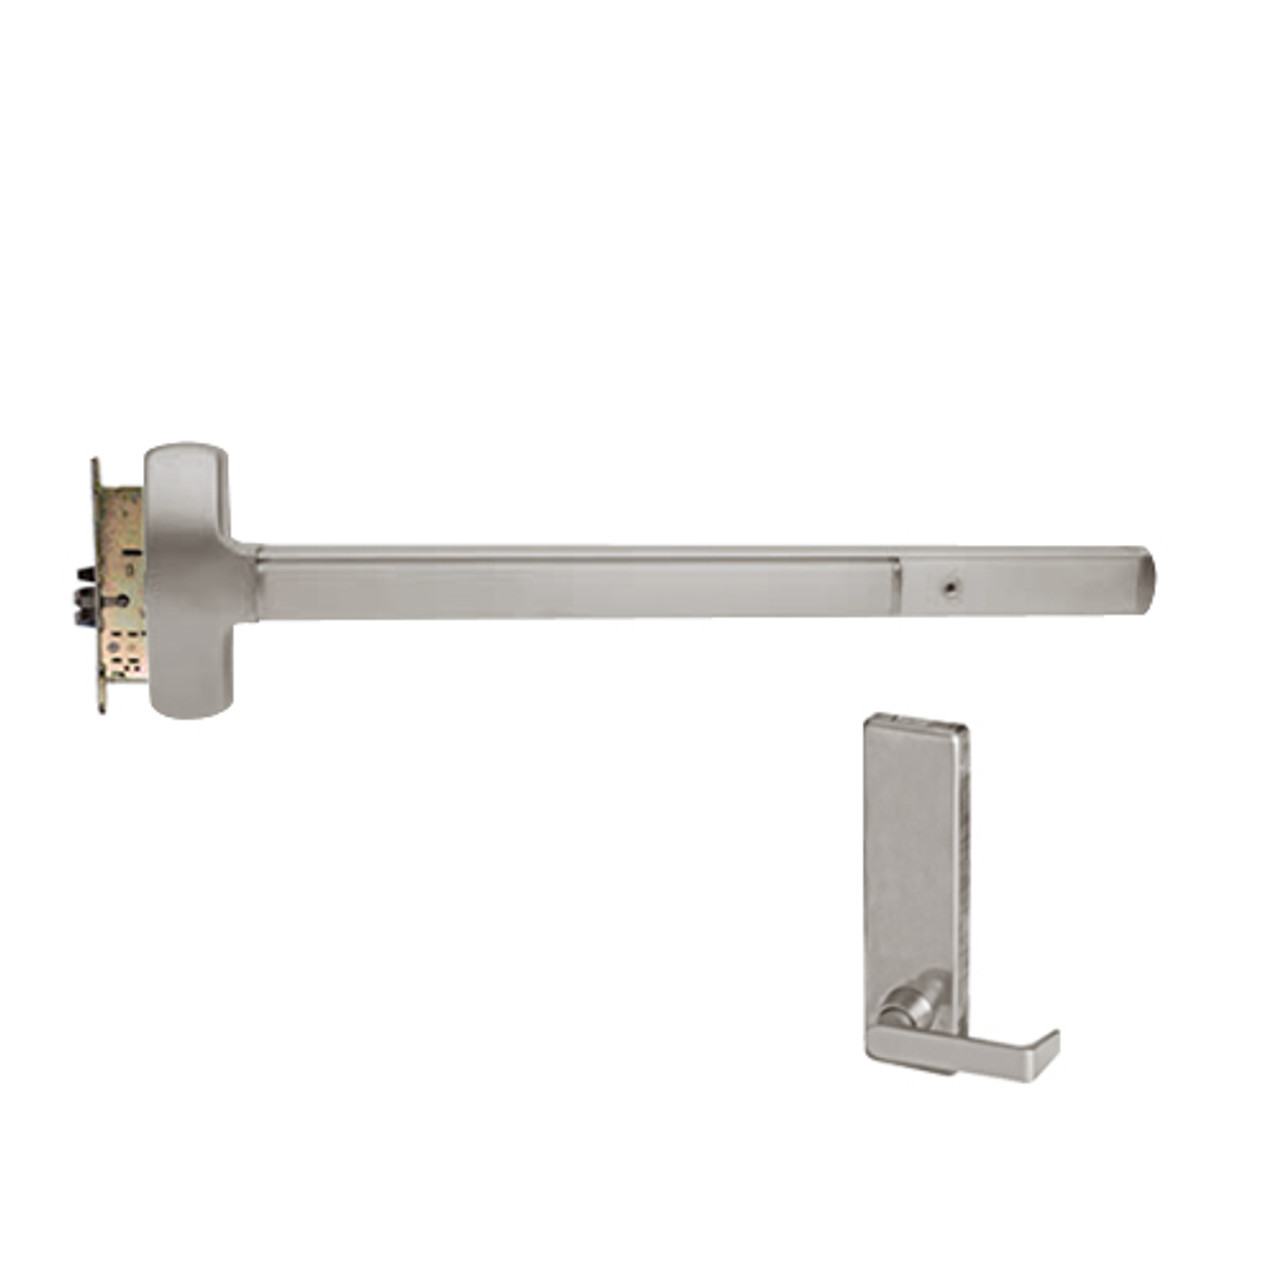 25-M-L-BE-DANE-US32D-4-LHR Falcon Exit Device in Satin Stainless Steel